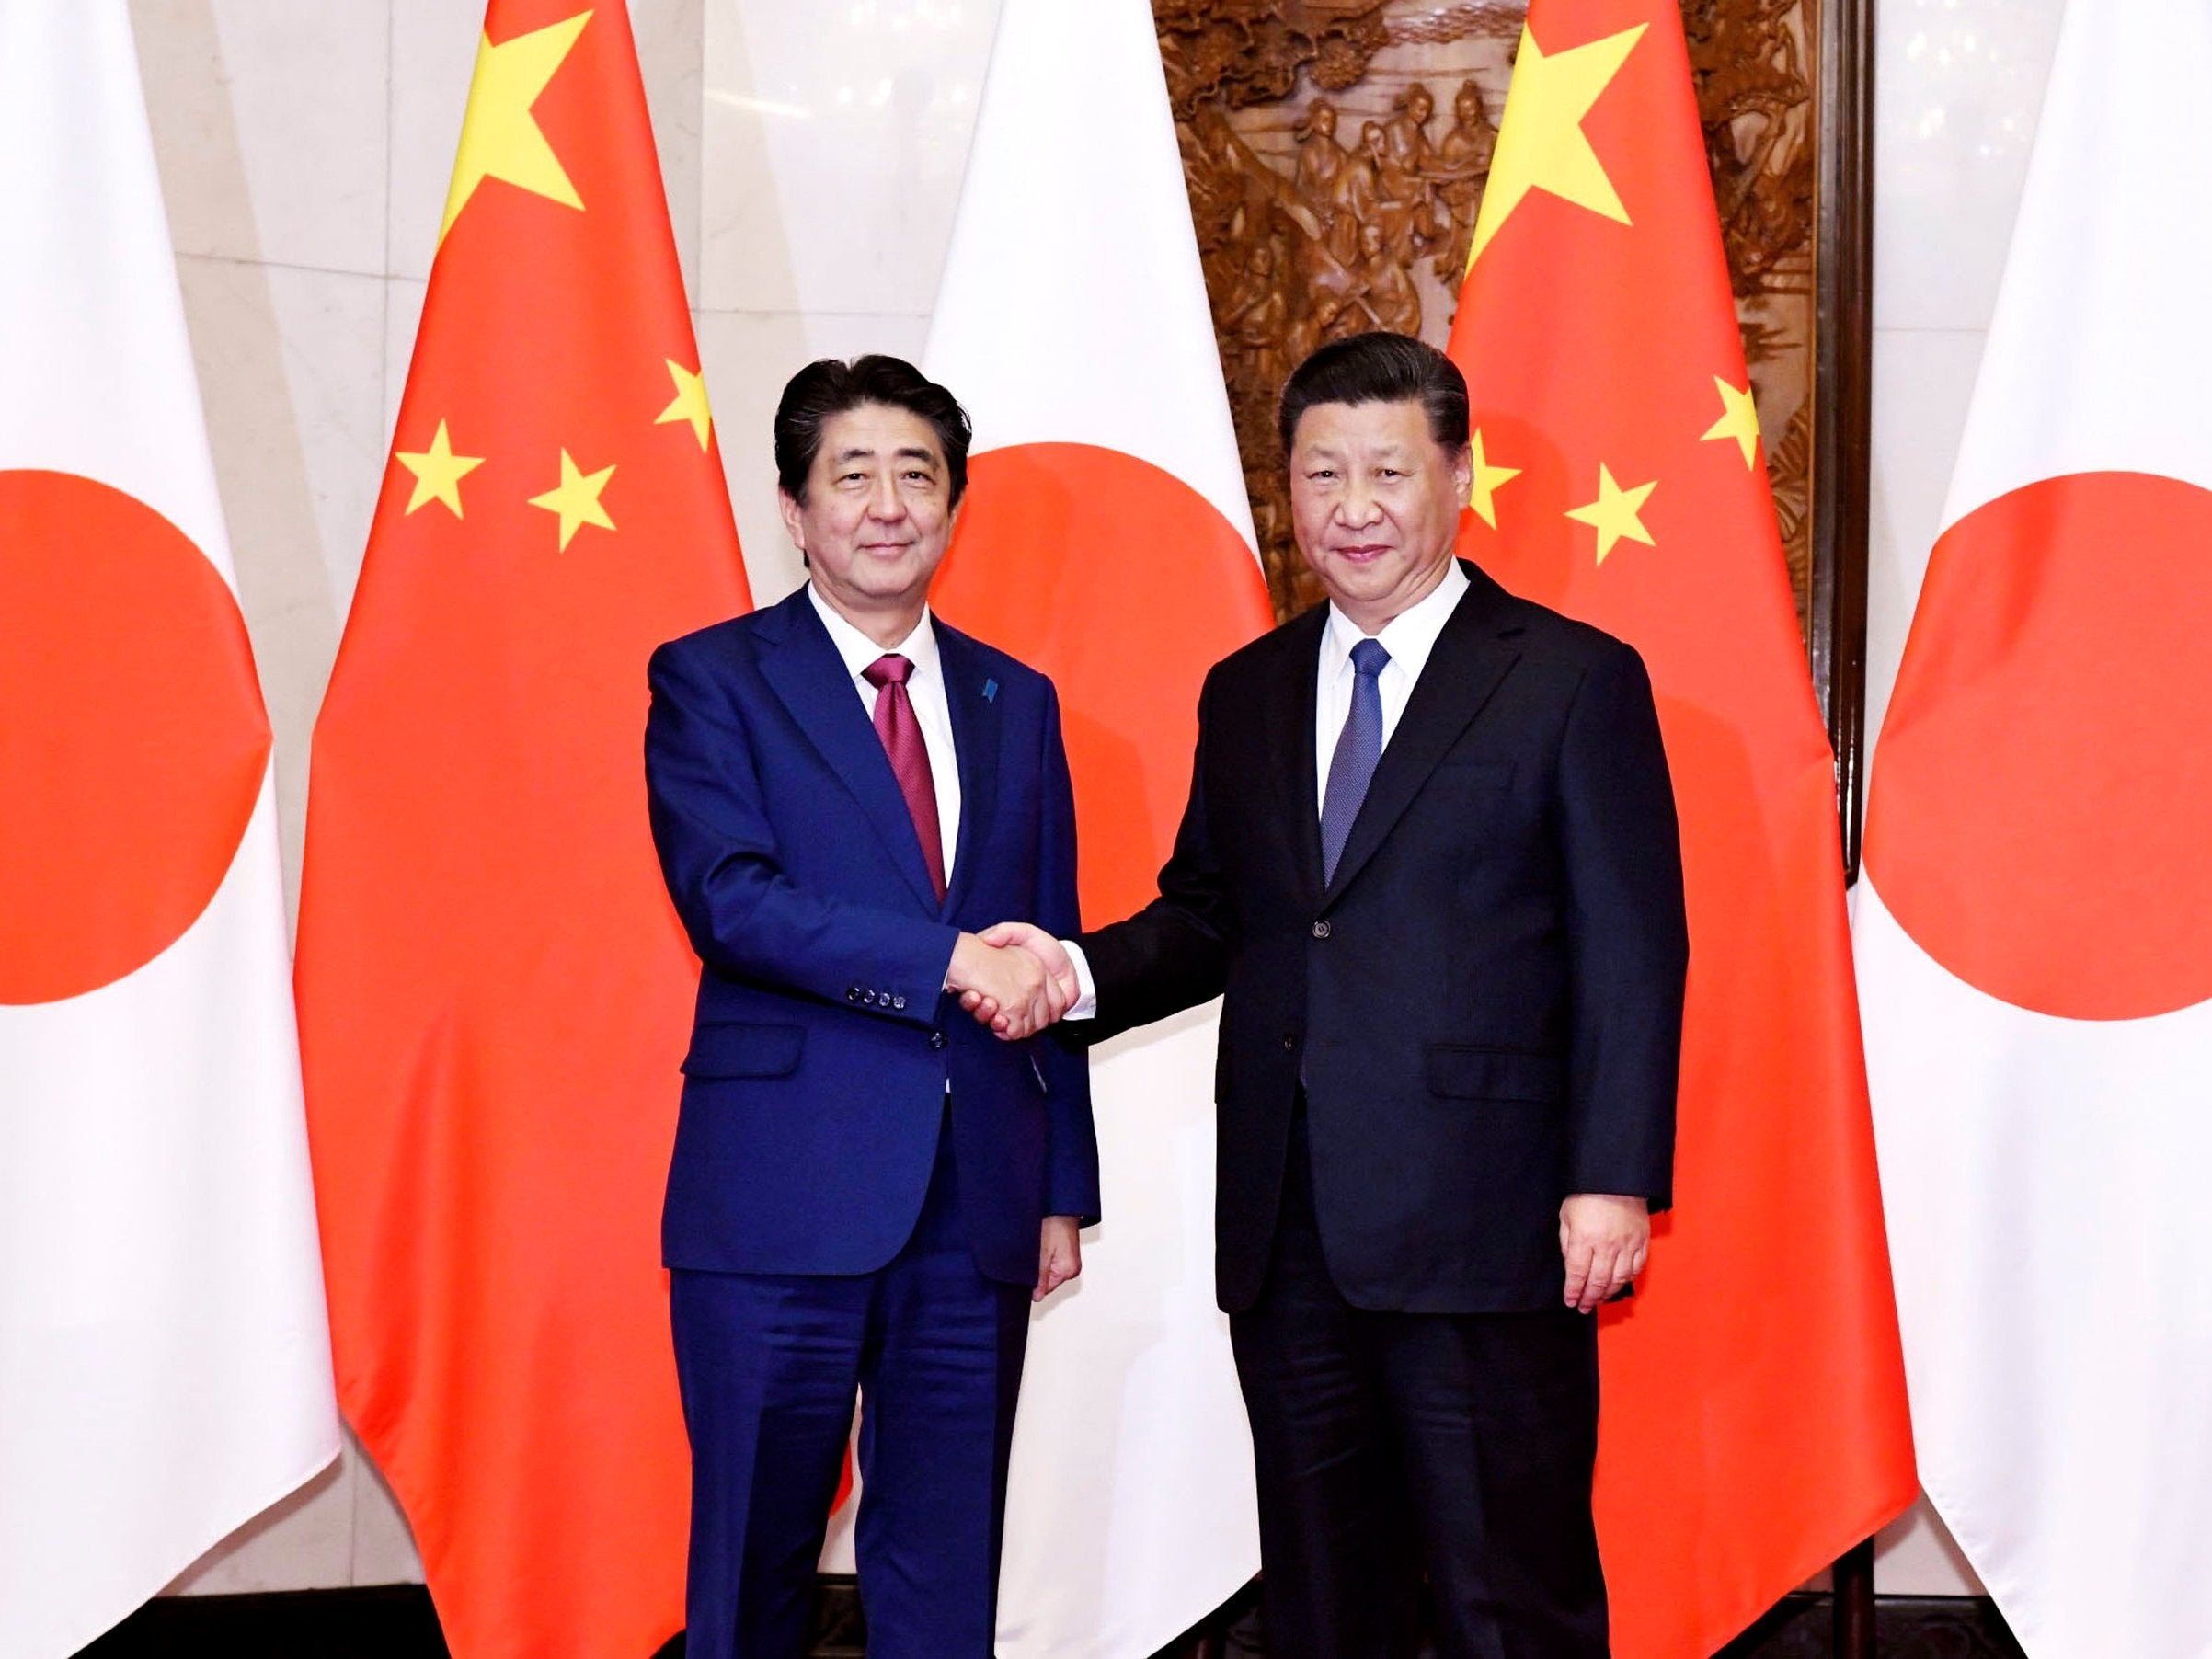 Japanese Prime Minister Shinzo Abe (left), poses with Chinese President Xi Jinping for a photo before a meeting at the Diaoyutai State Guesthouse in Beijing Friday 26 October 2018 (Kyodo News via